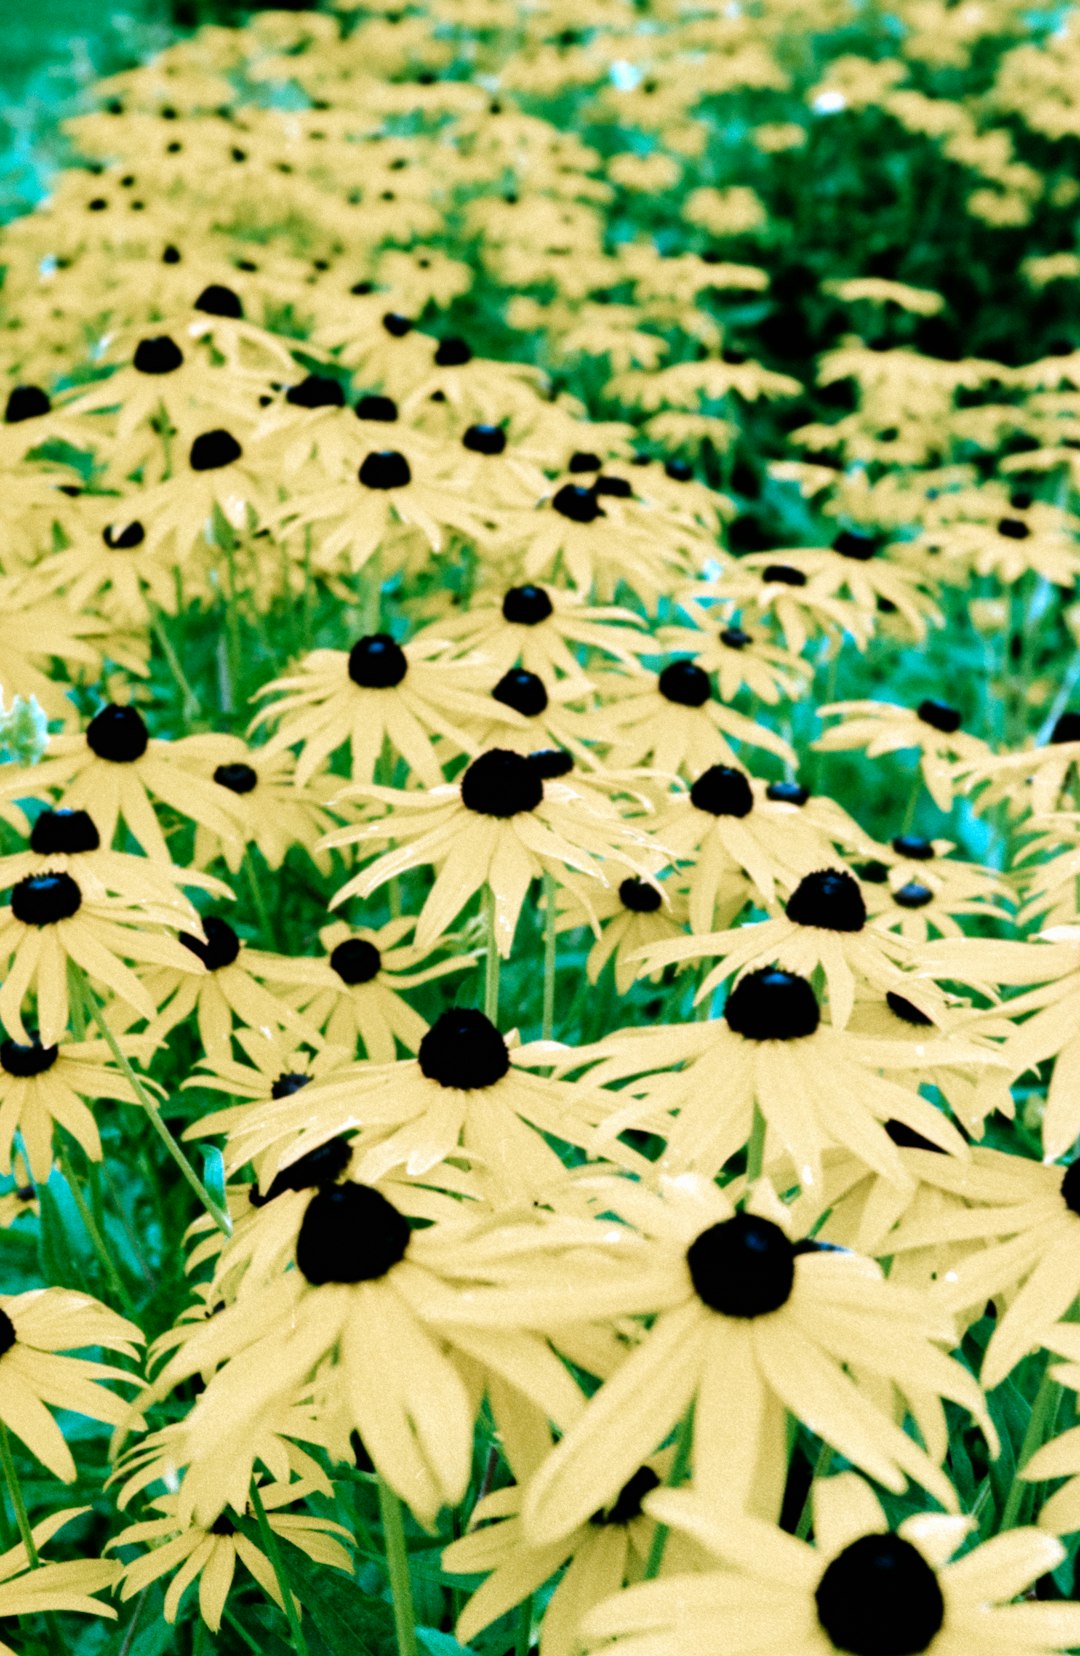 yellow and black sunflower field during daytime